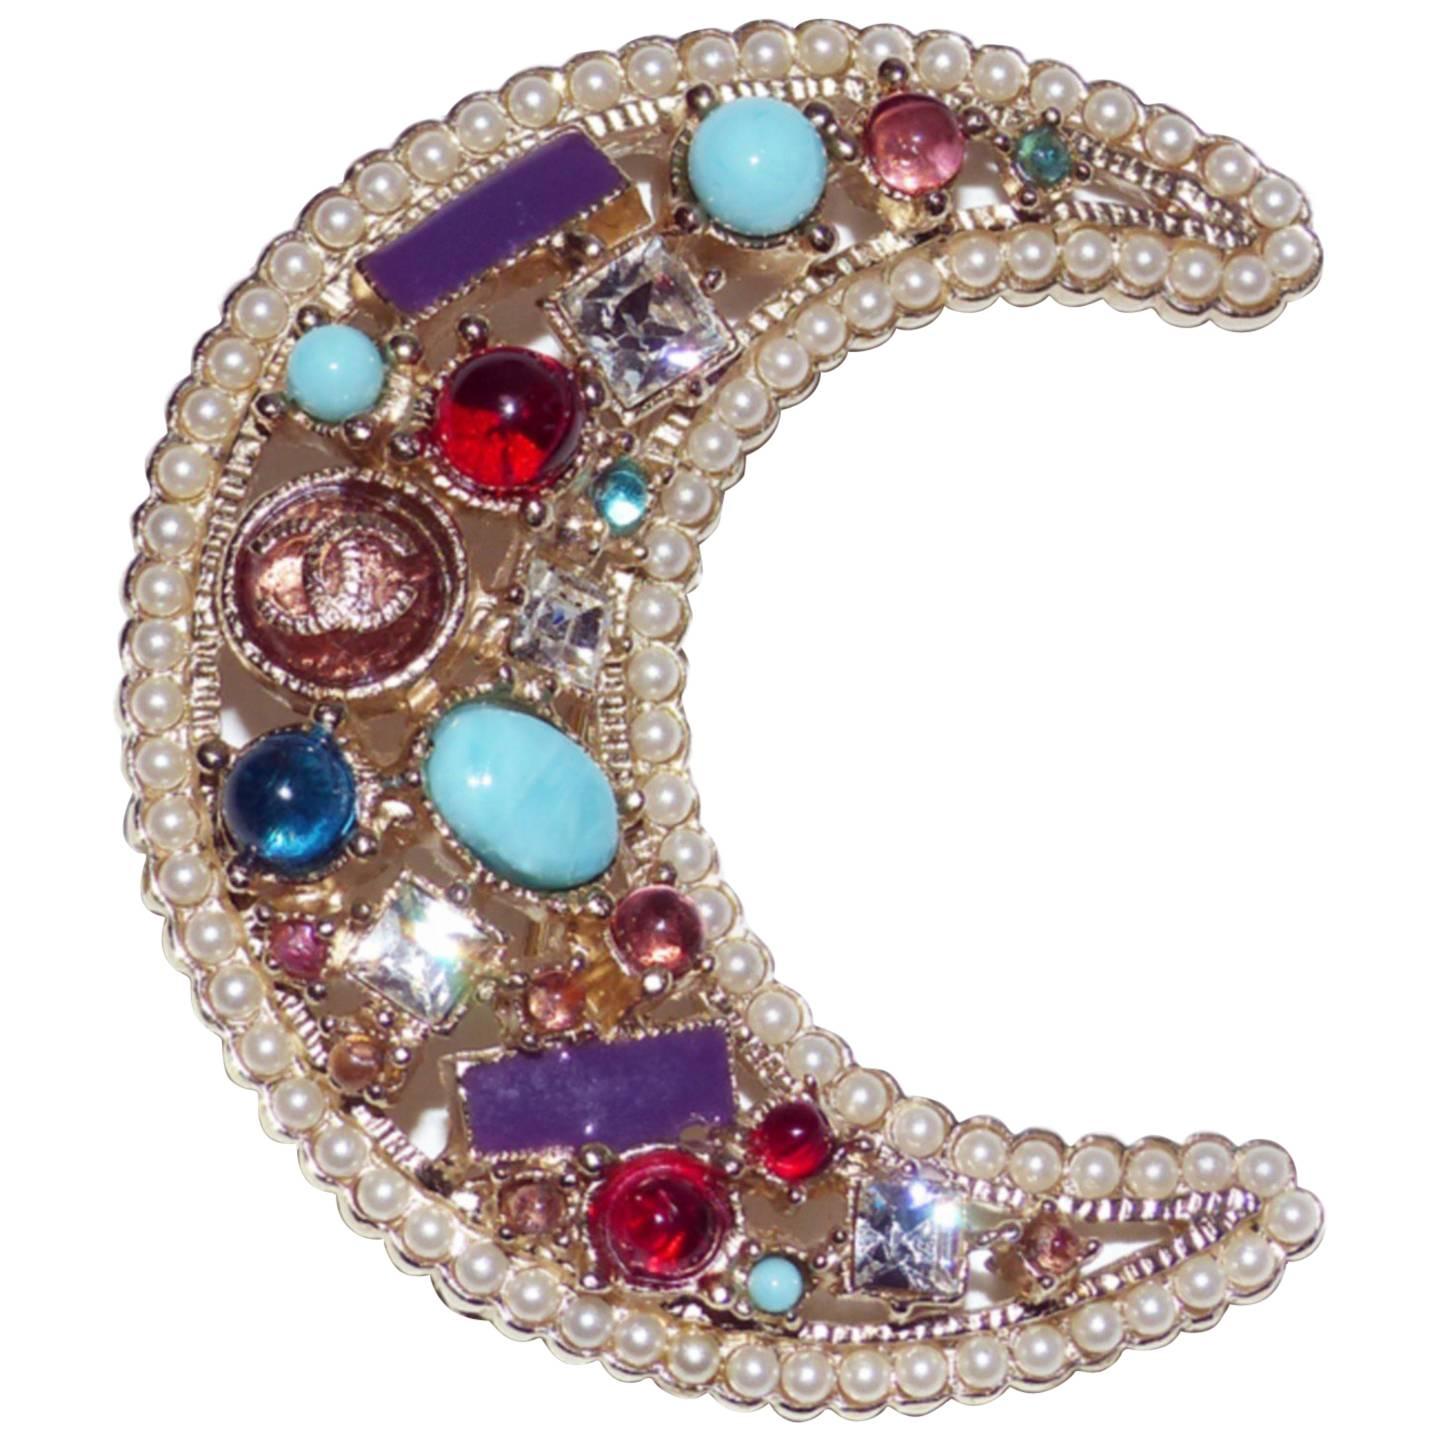 STUNNING Chanel Moon Brooch Multicolor Pearls and Stones / Good Condition 